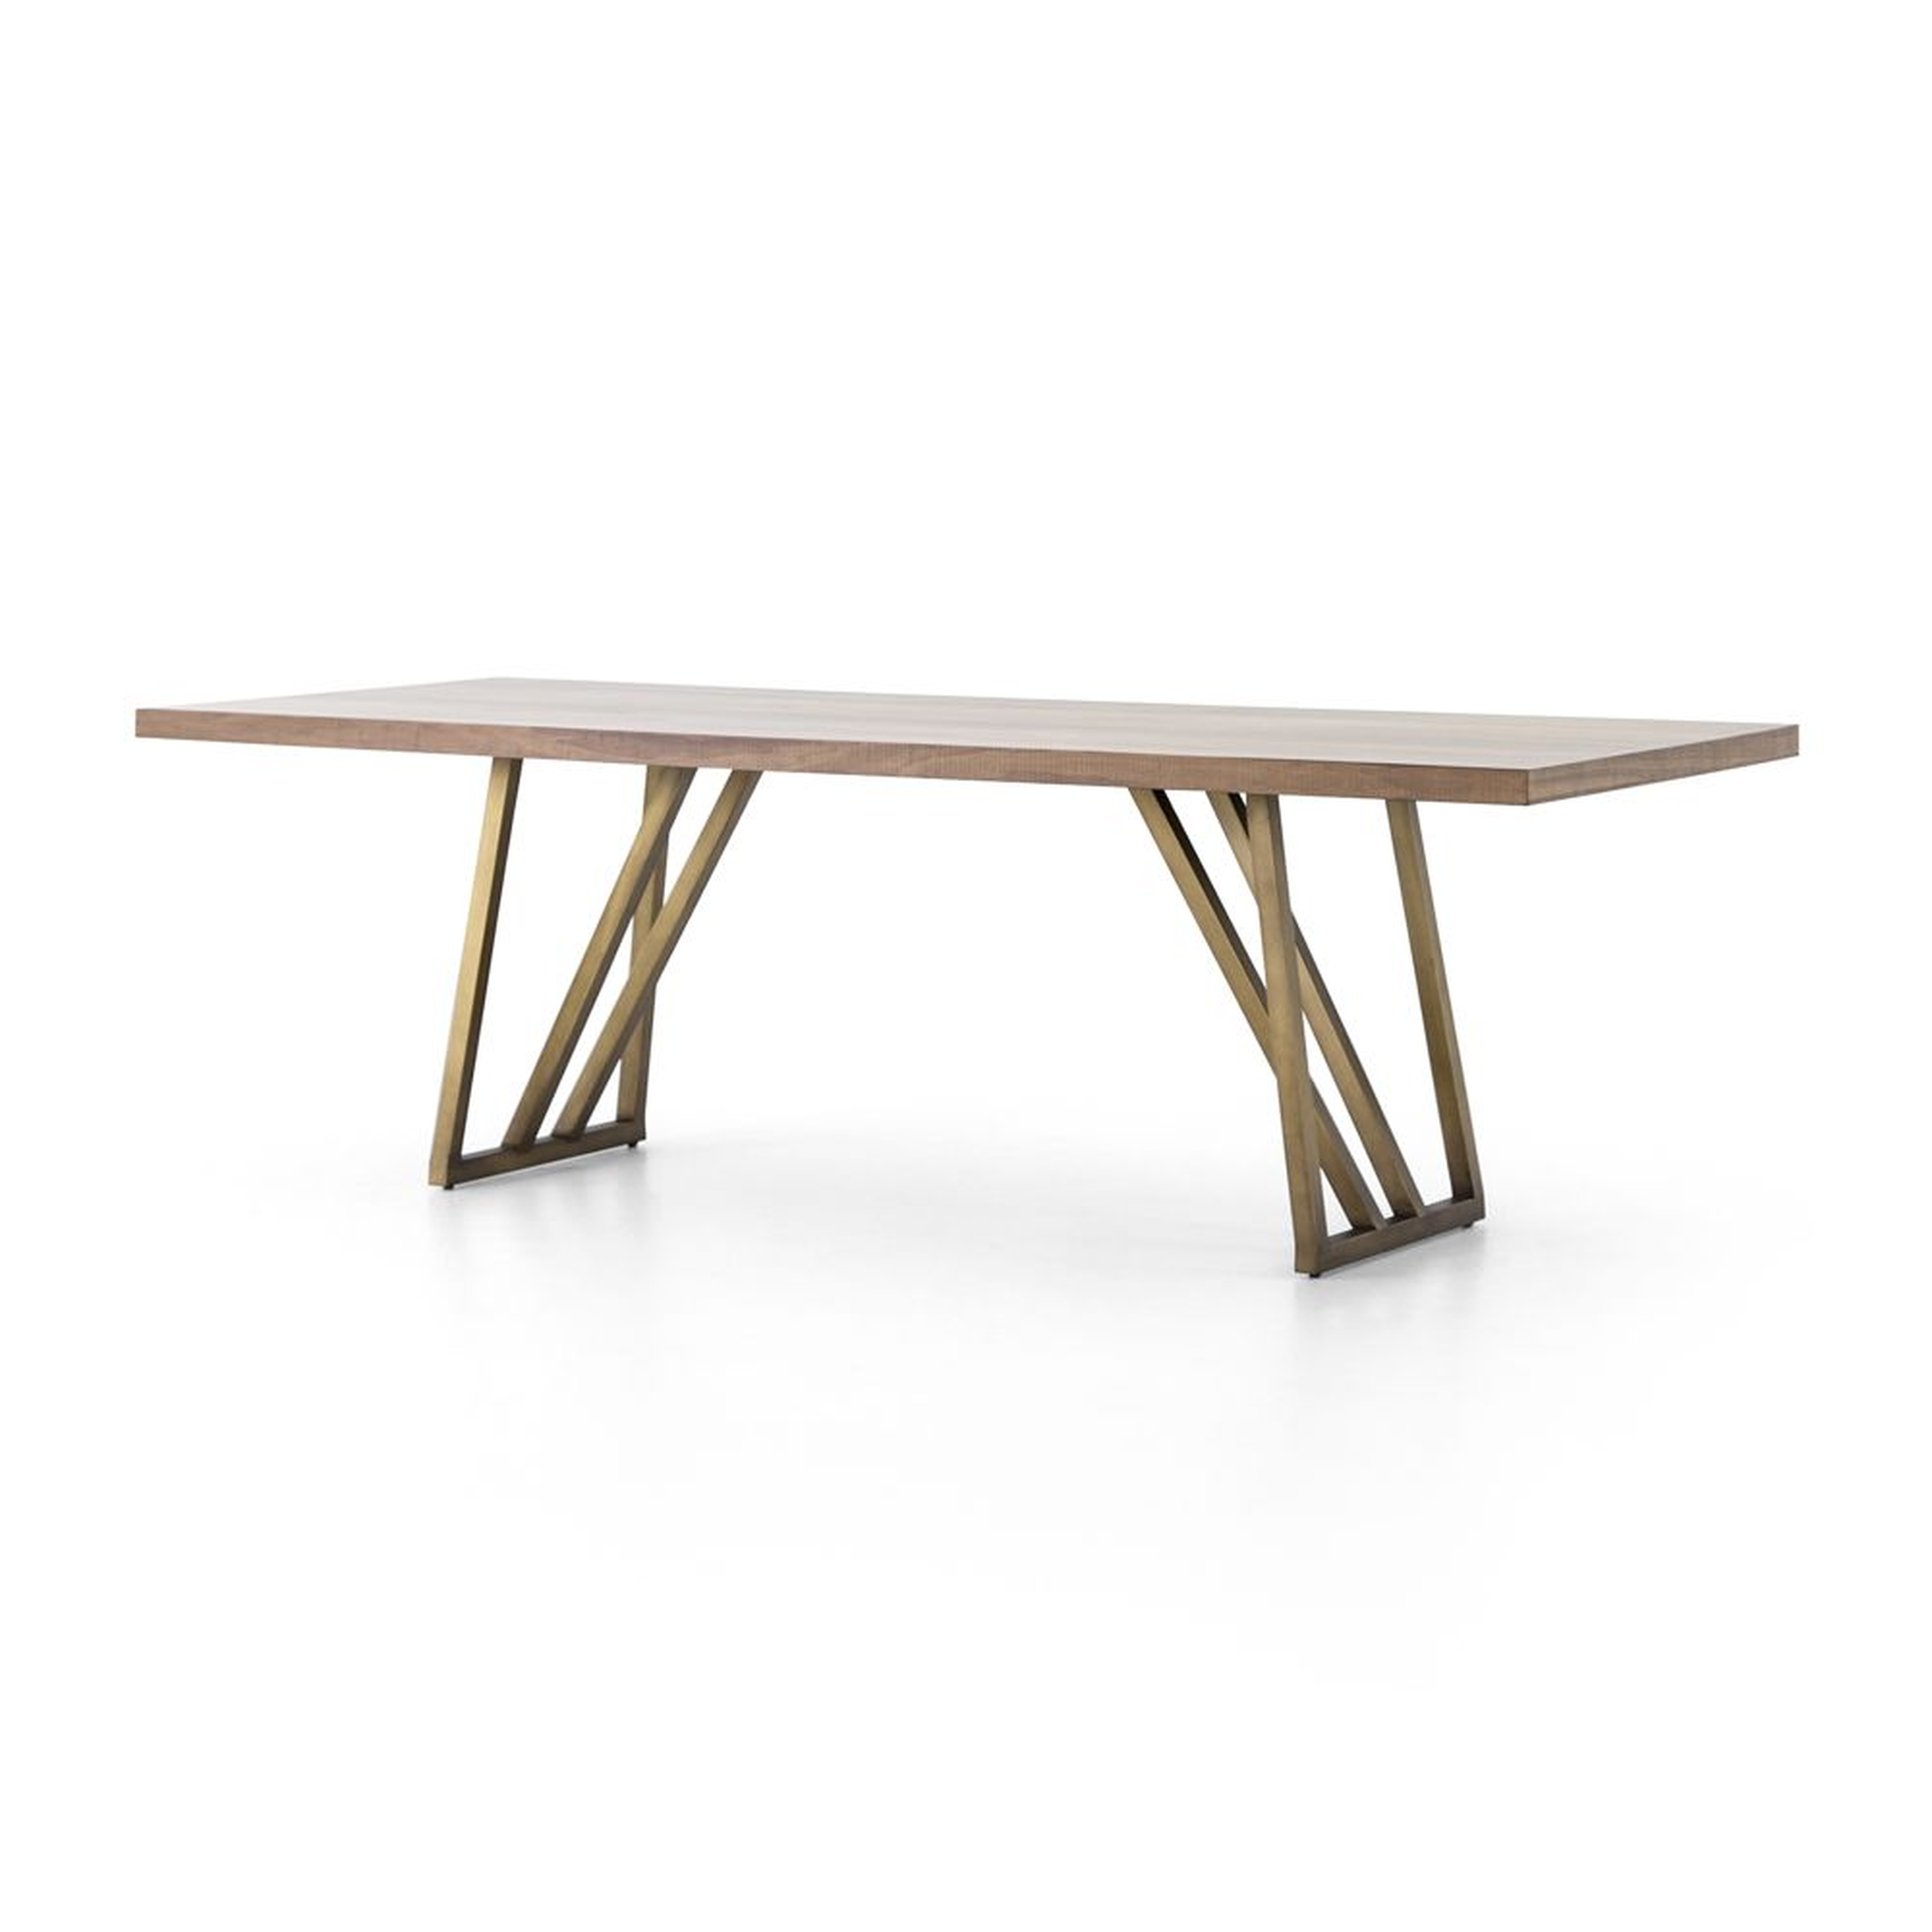 Madina Walnut Dining Table - Crate and Barrel